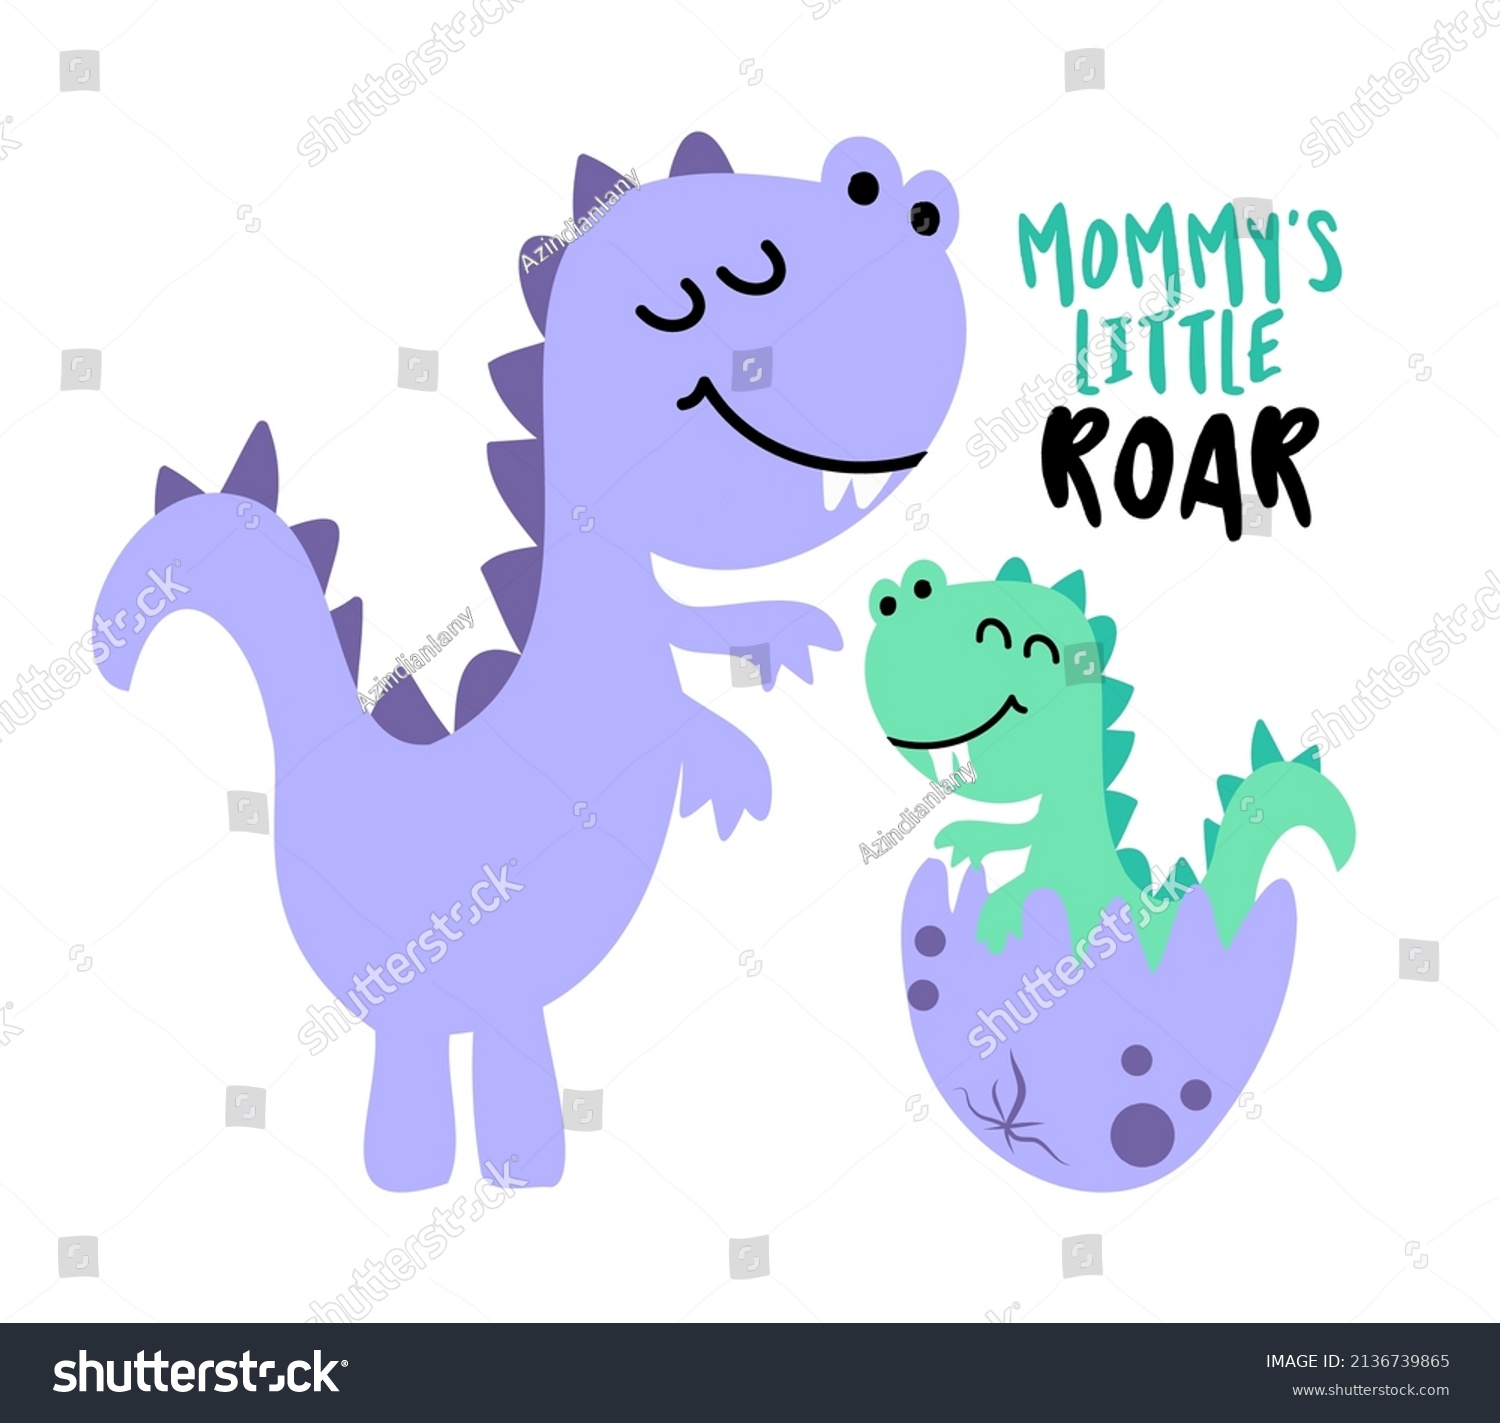 SVG of Mommy's little Roar - Mother's Day cute hand drawn t rex illustration. Jurassic greeting card. Good for poster, banner, textile, gift, shirt, mugs. Dinosaur animal love card. svg